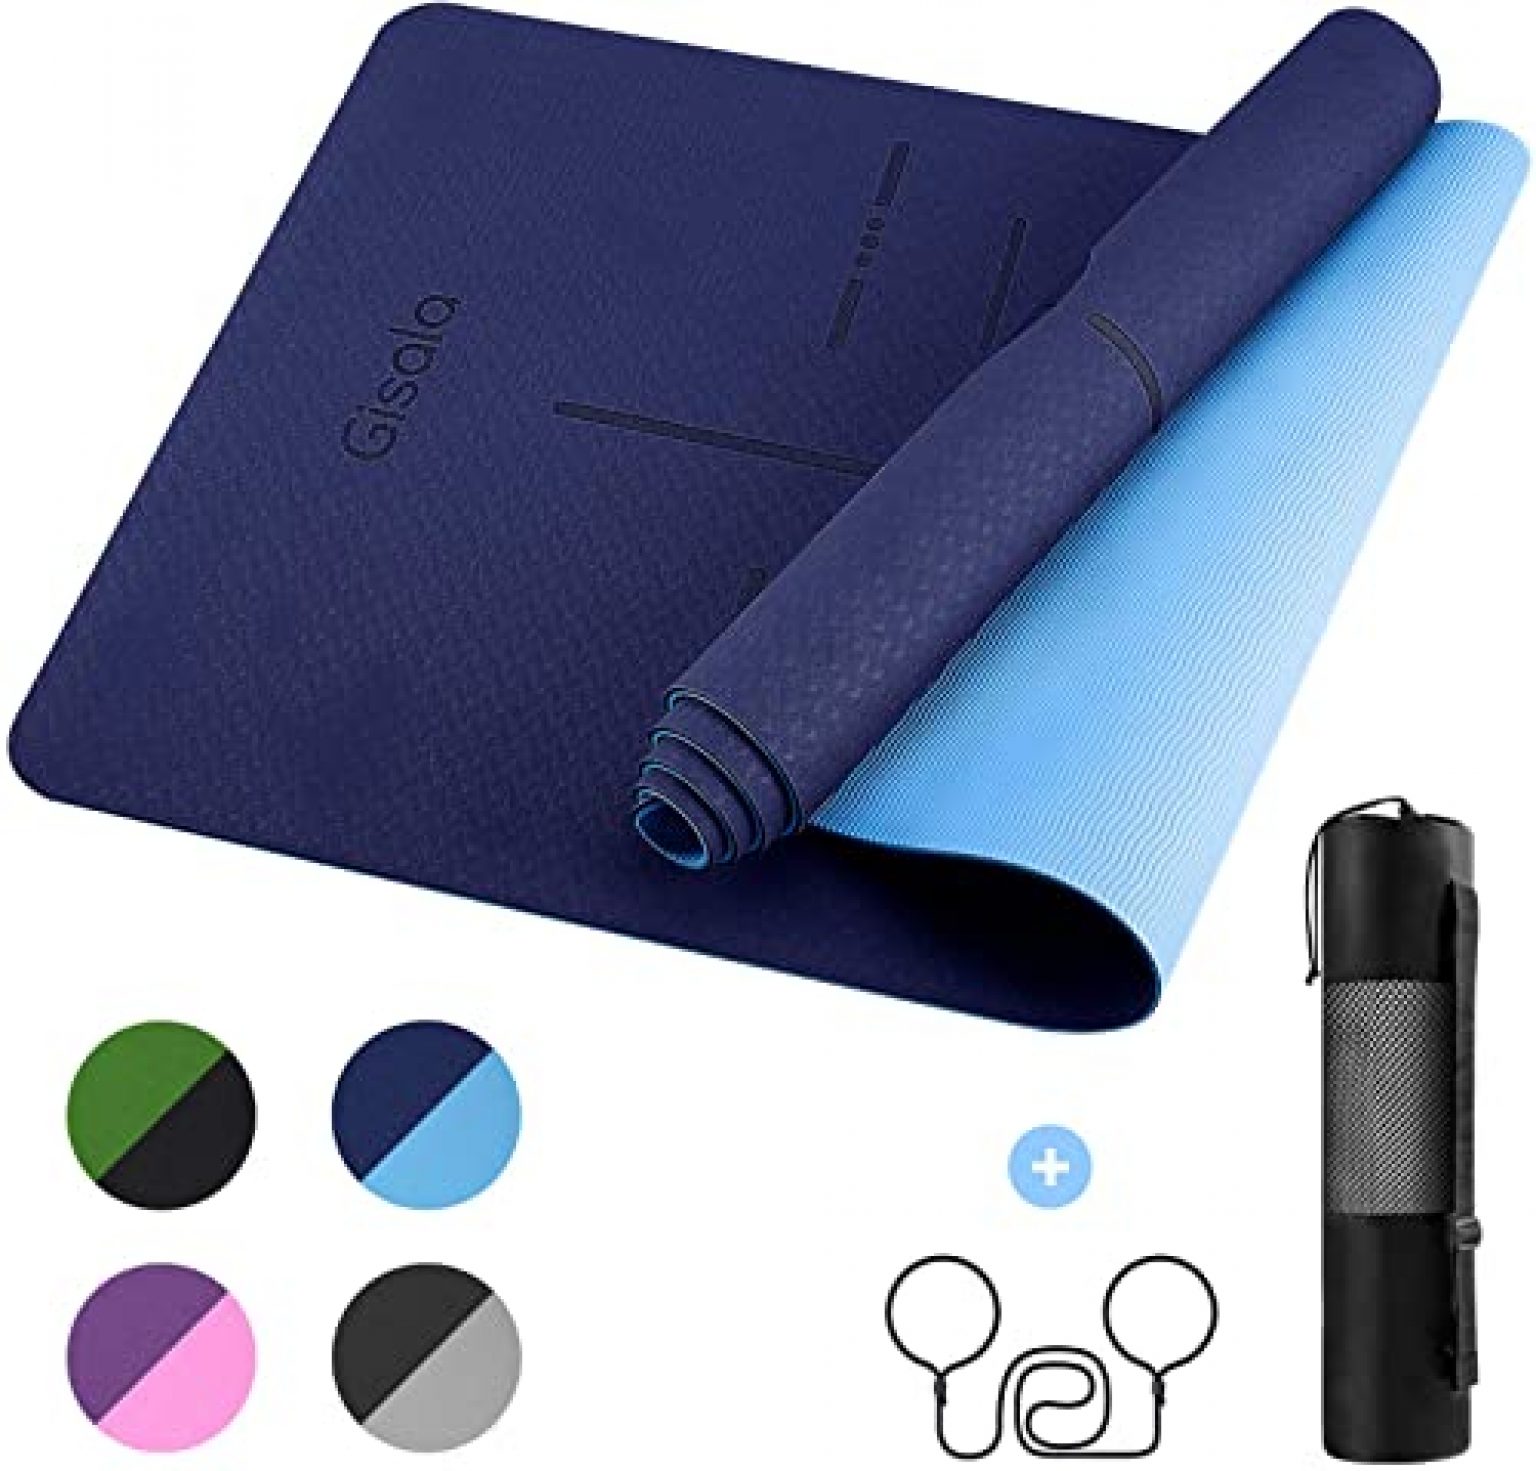 BalanceFrom + All-Purpose 1/2-Inch Extra Thick High Density Anti-Tear  Exercise Yoga Mat and Knee Pad with Carrying Strap